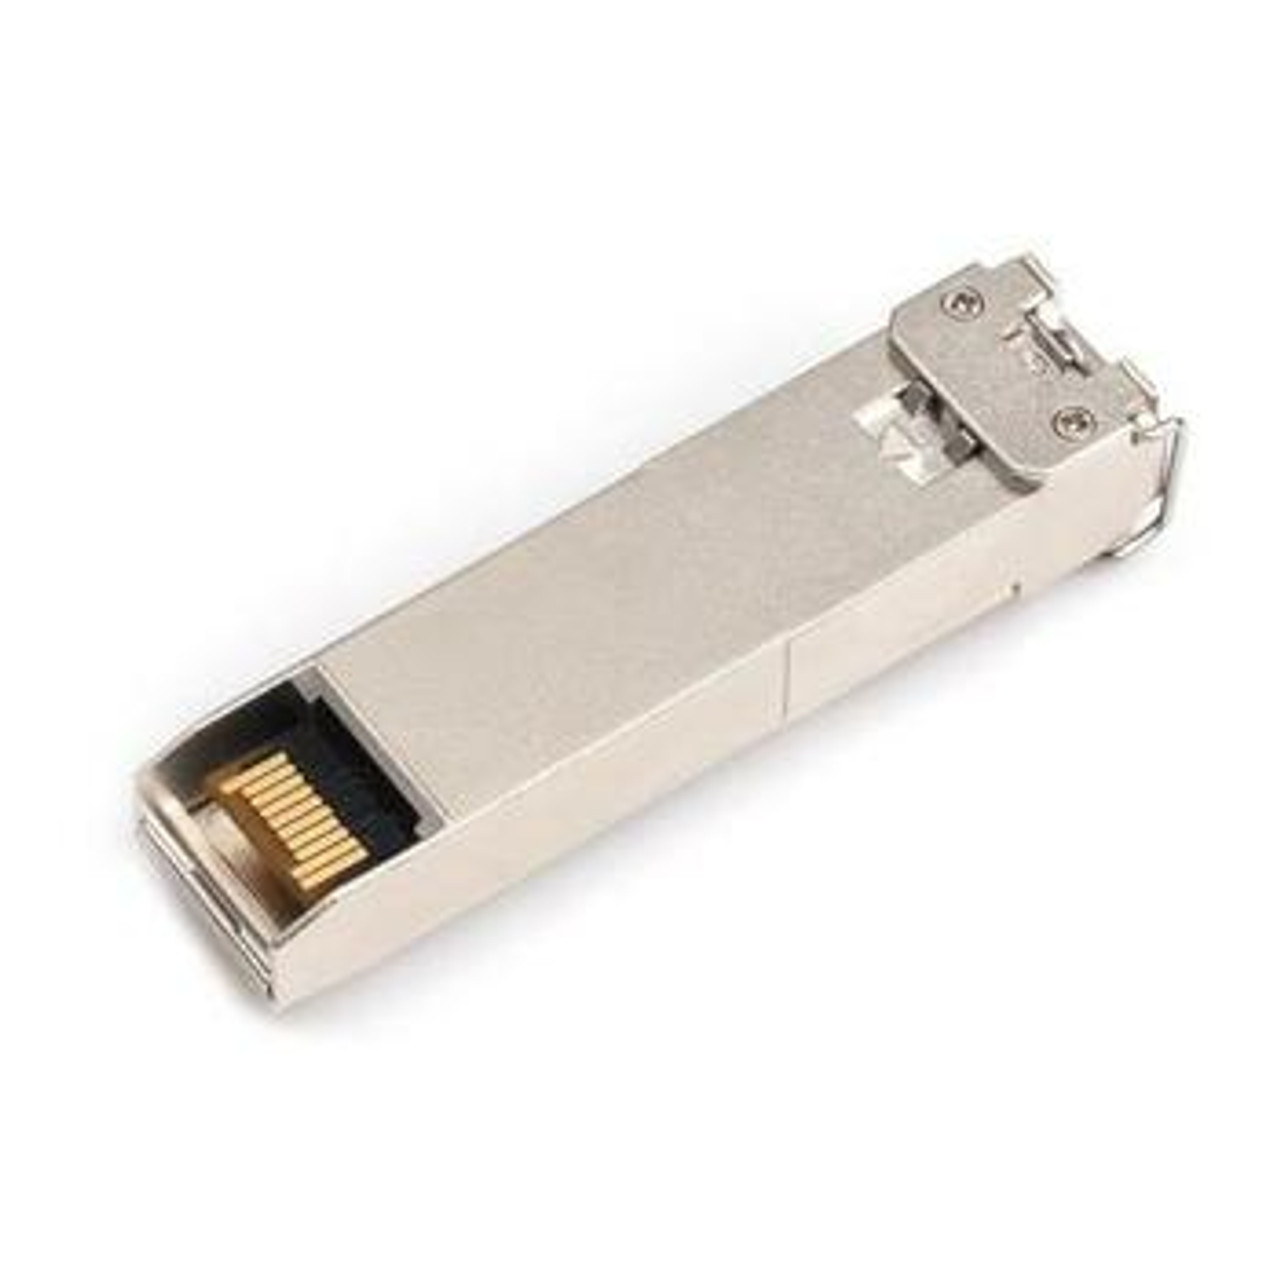 88Y6393 IBM 16Gbps SFP+ Transceiver Module by Brocade